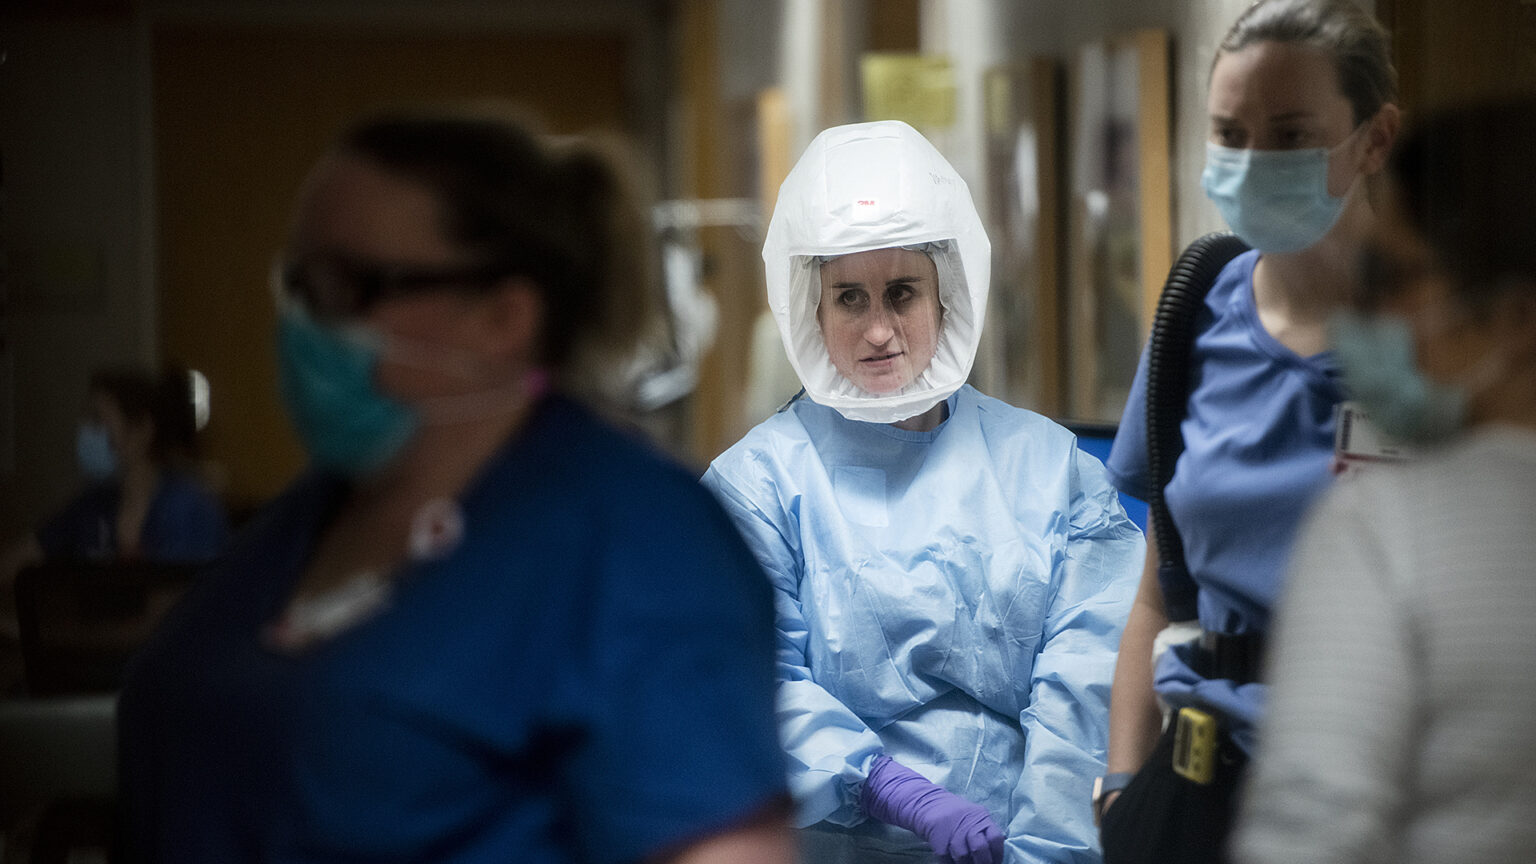 Nurses and doctors wearing personal protective equipment walk through a hallway.